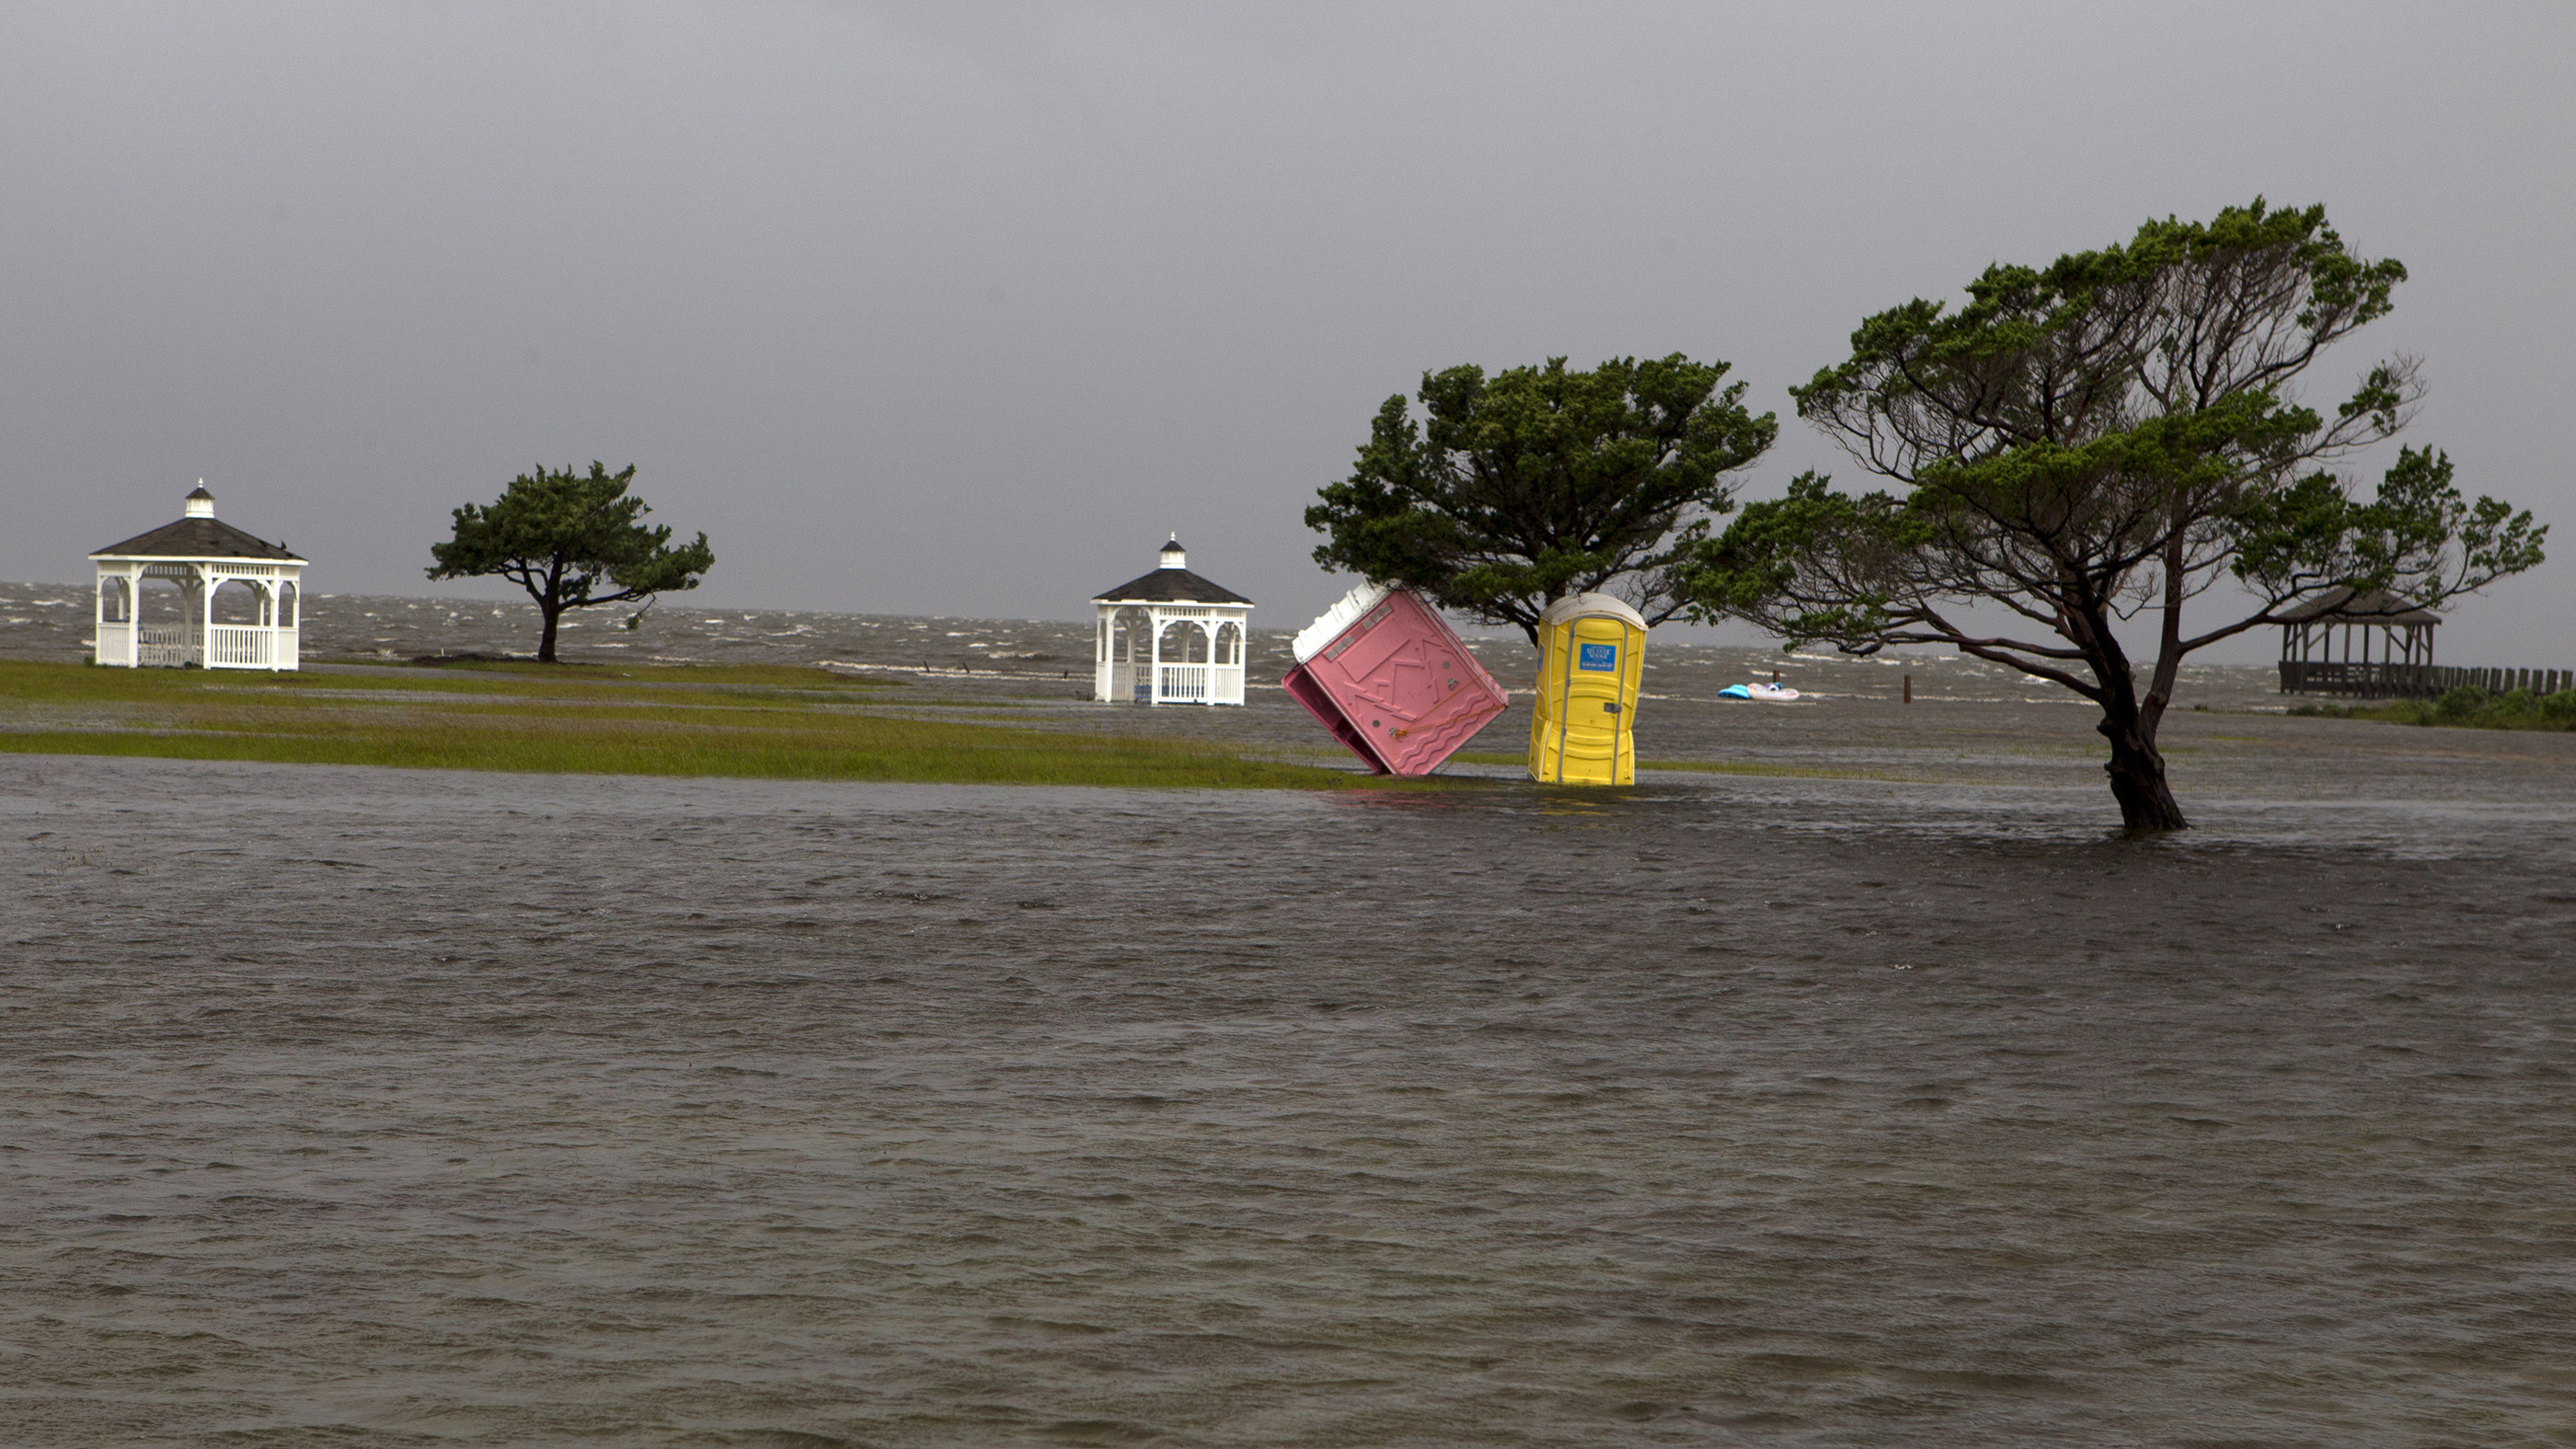 A flooded park is seen in Rodanthe as Hurricane Dorian hits Cape Hatteras in North Carolina on Sept. 6, 2019.